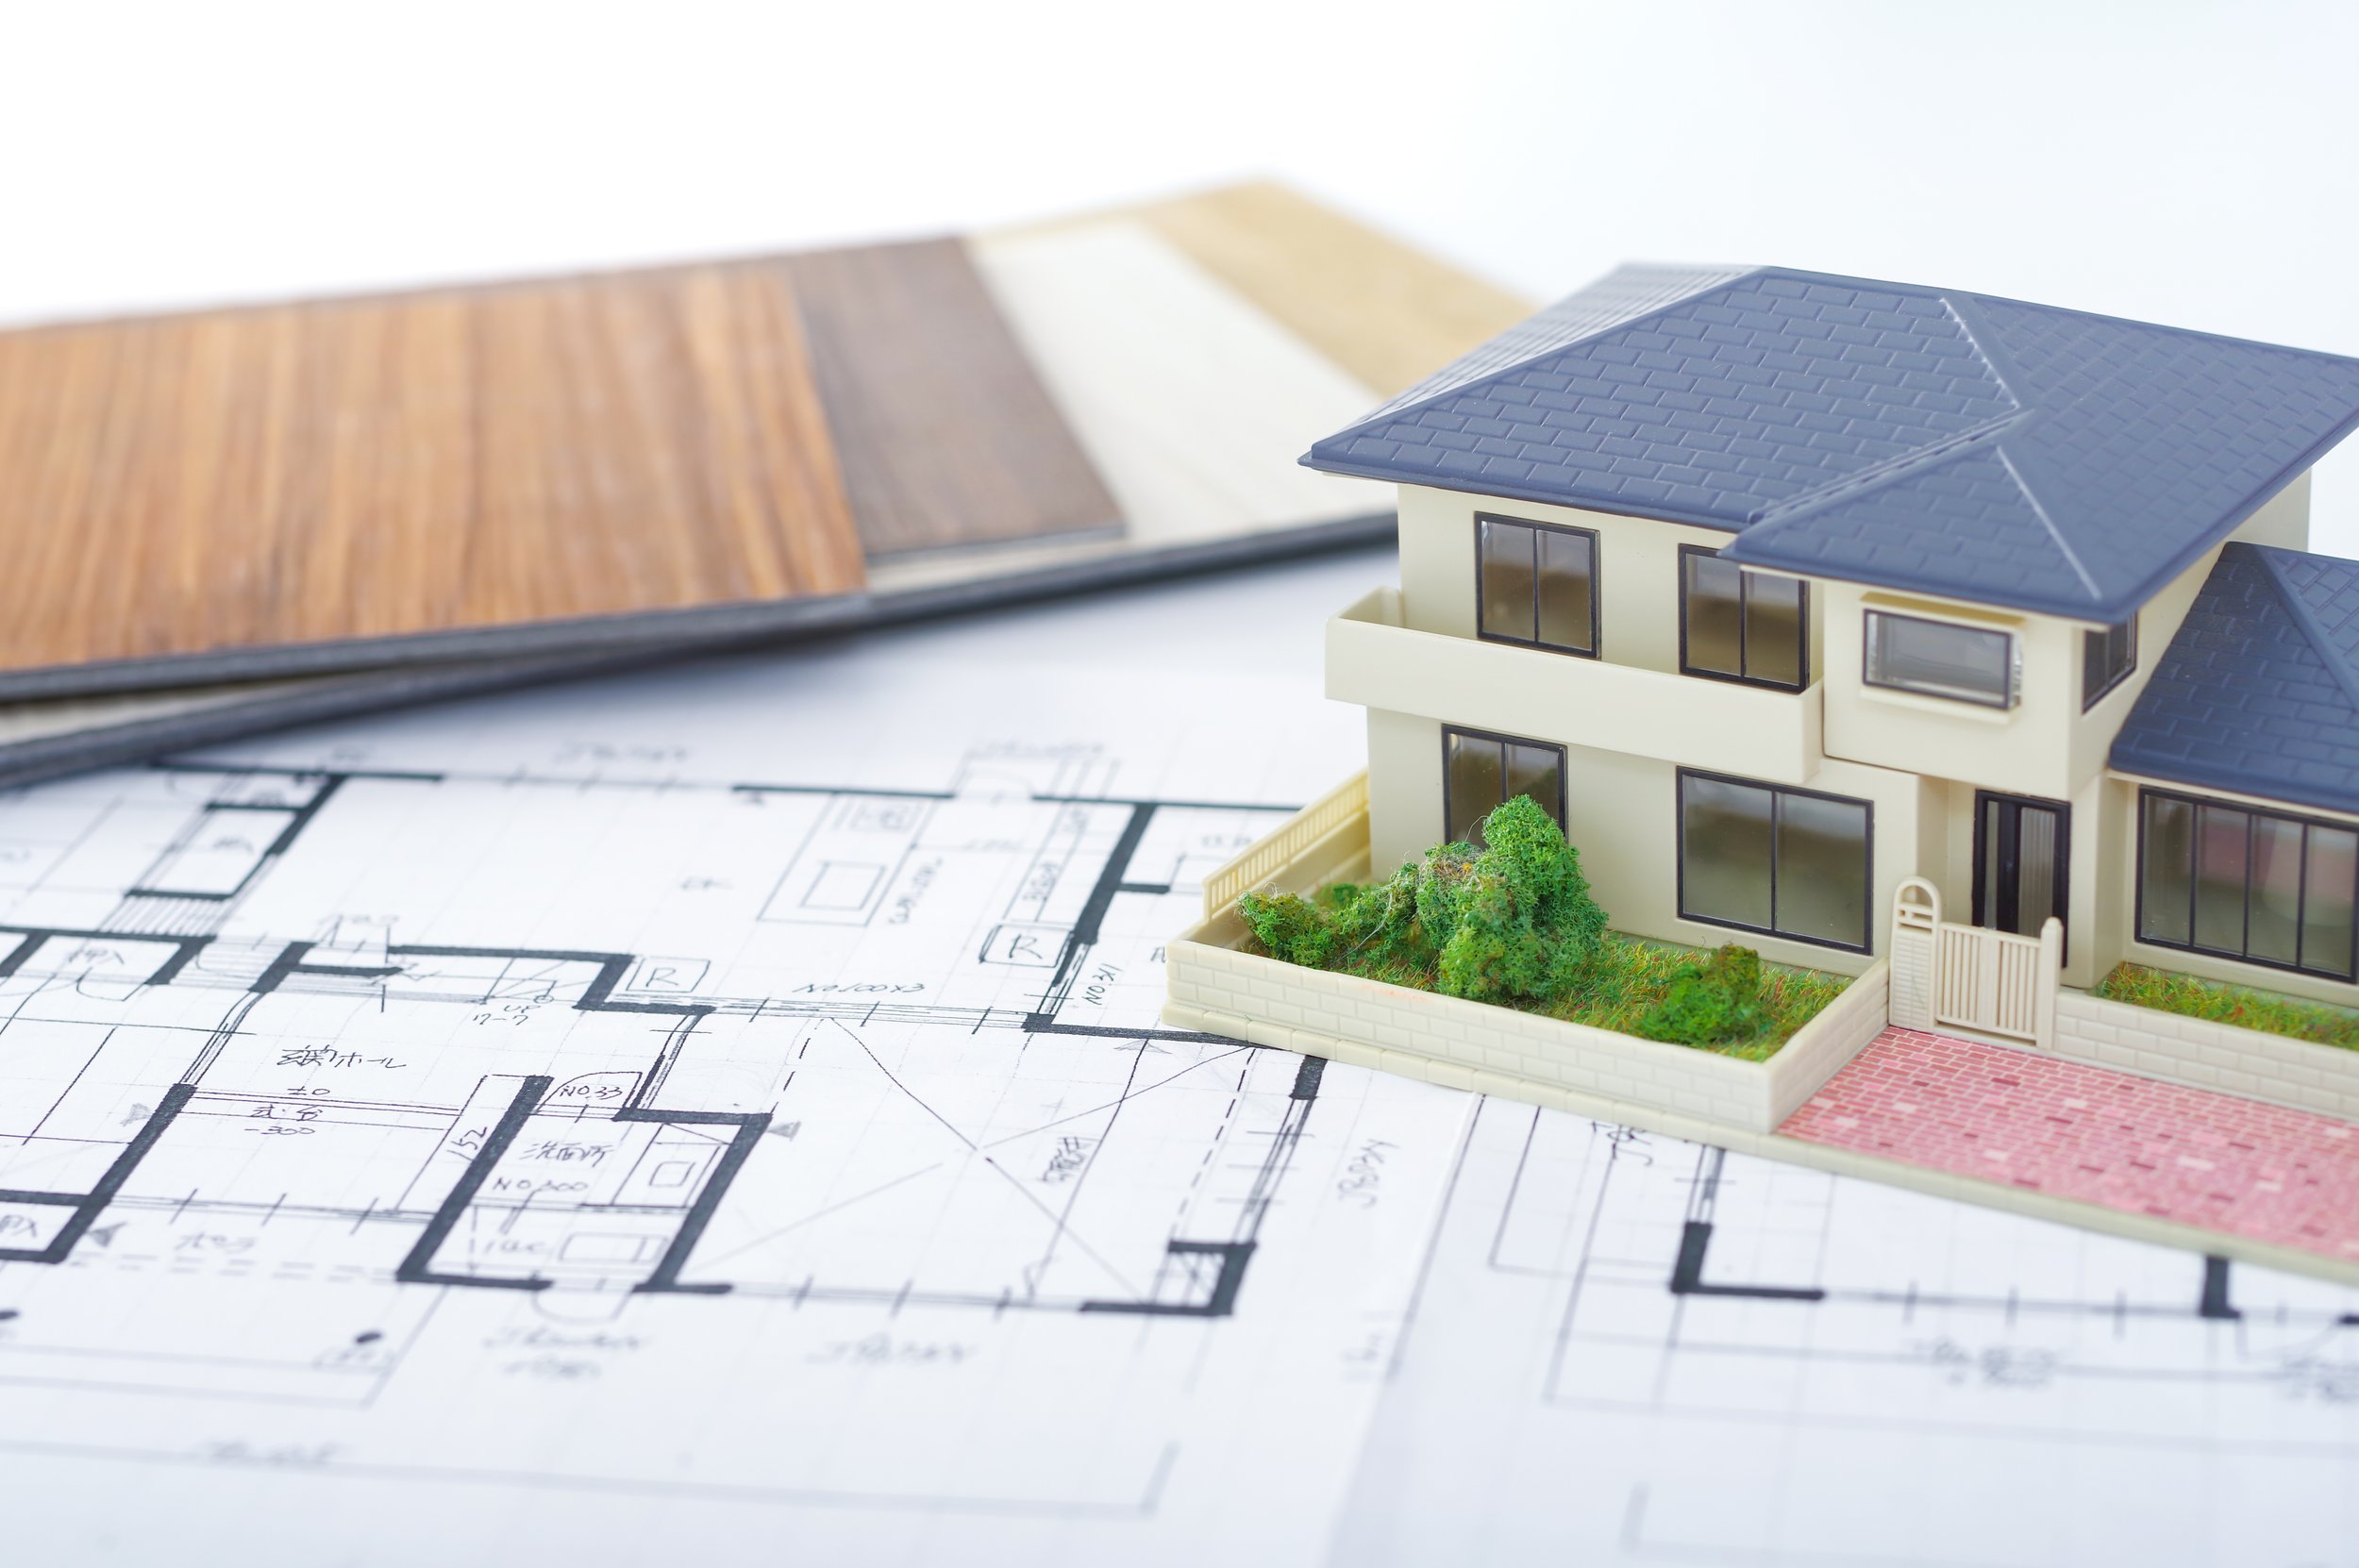 Building Permits & Fees to Build a Custom Home in San Diego | Buildable